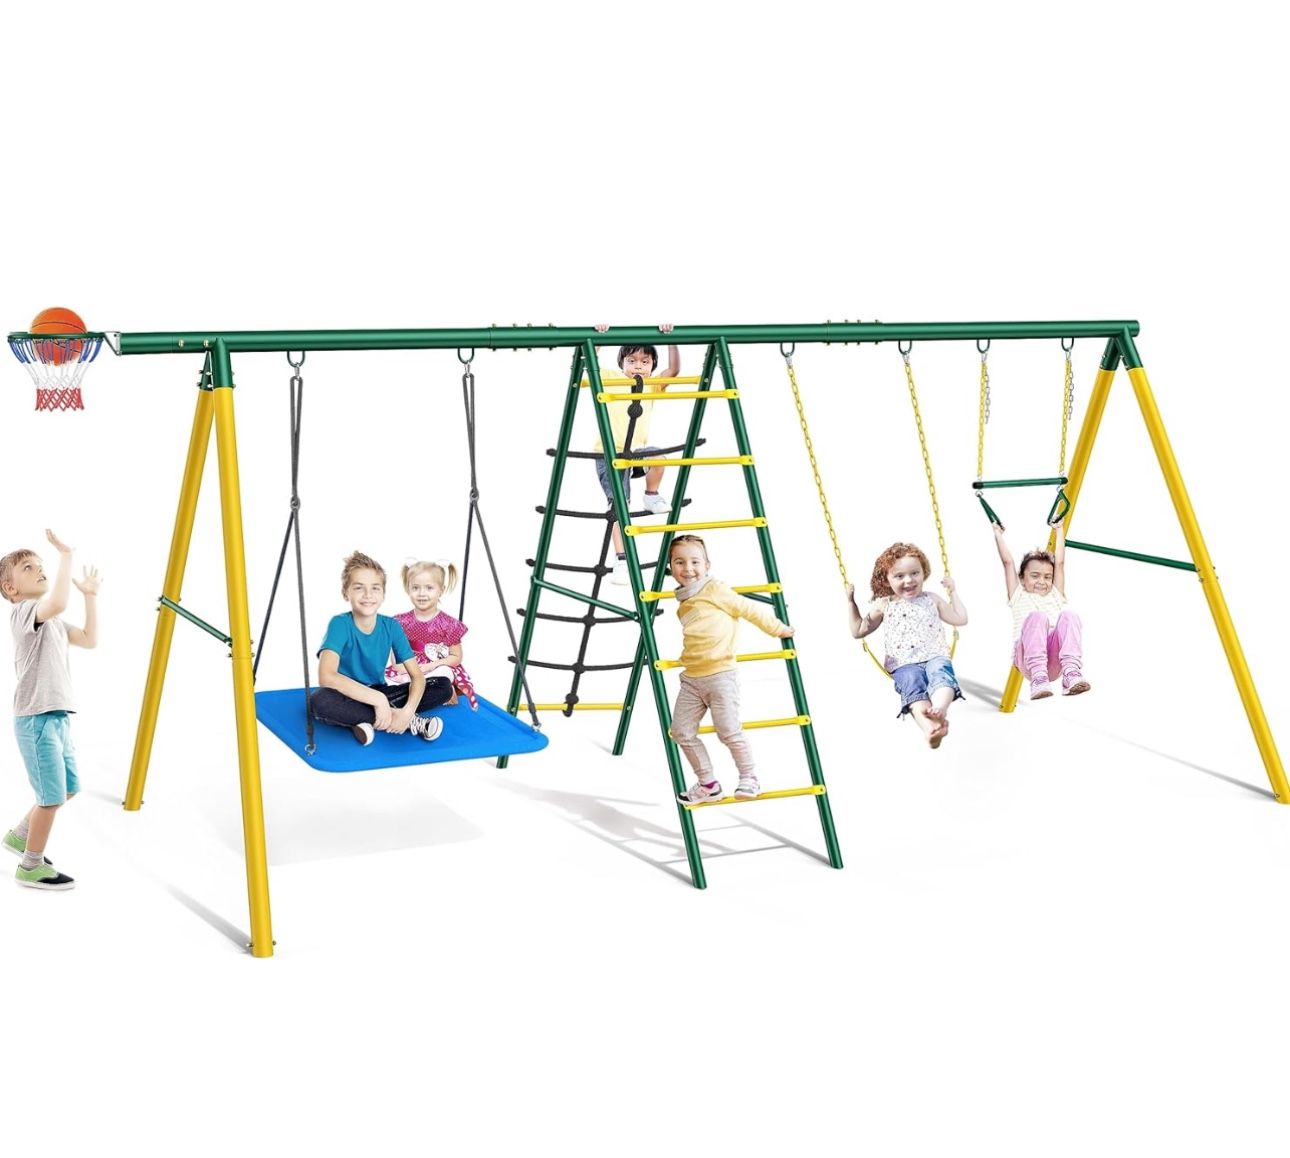 Osoeri Swing Sets for Backyard, 6 in 1 Swing Sets,Heavy-Duty Metal Swing Sets for Backyard with 2 Swings, Climbing Ladder and Nets,Trapeze Bar and Bas